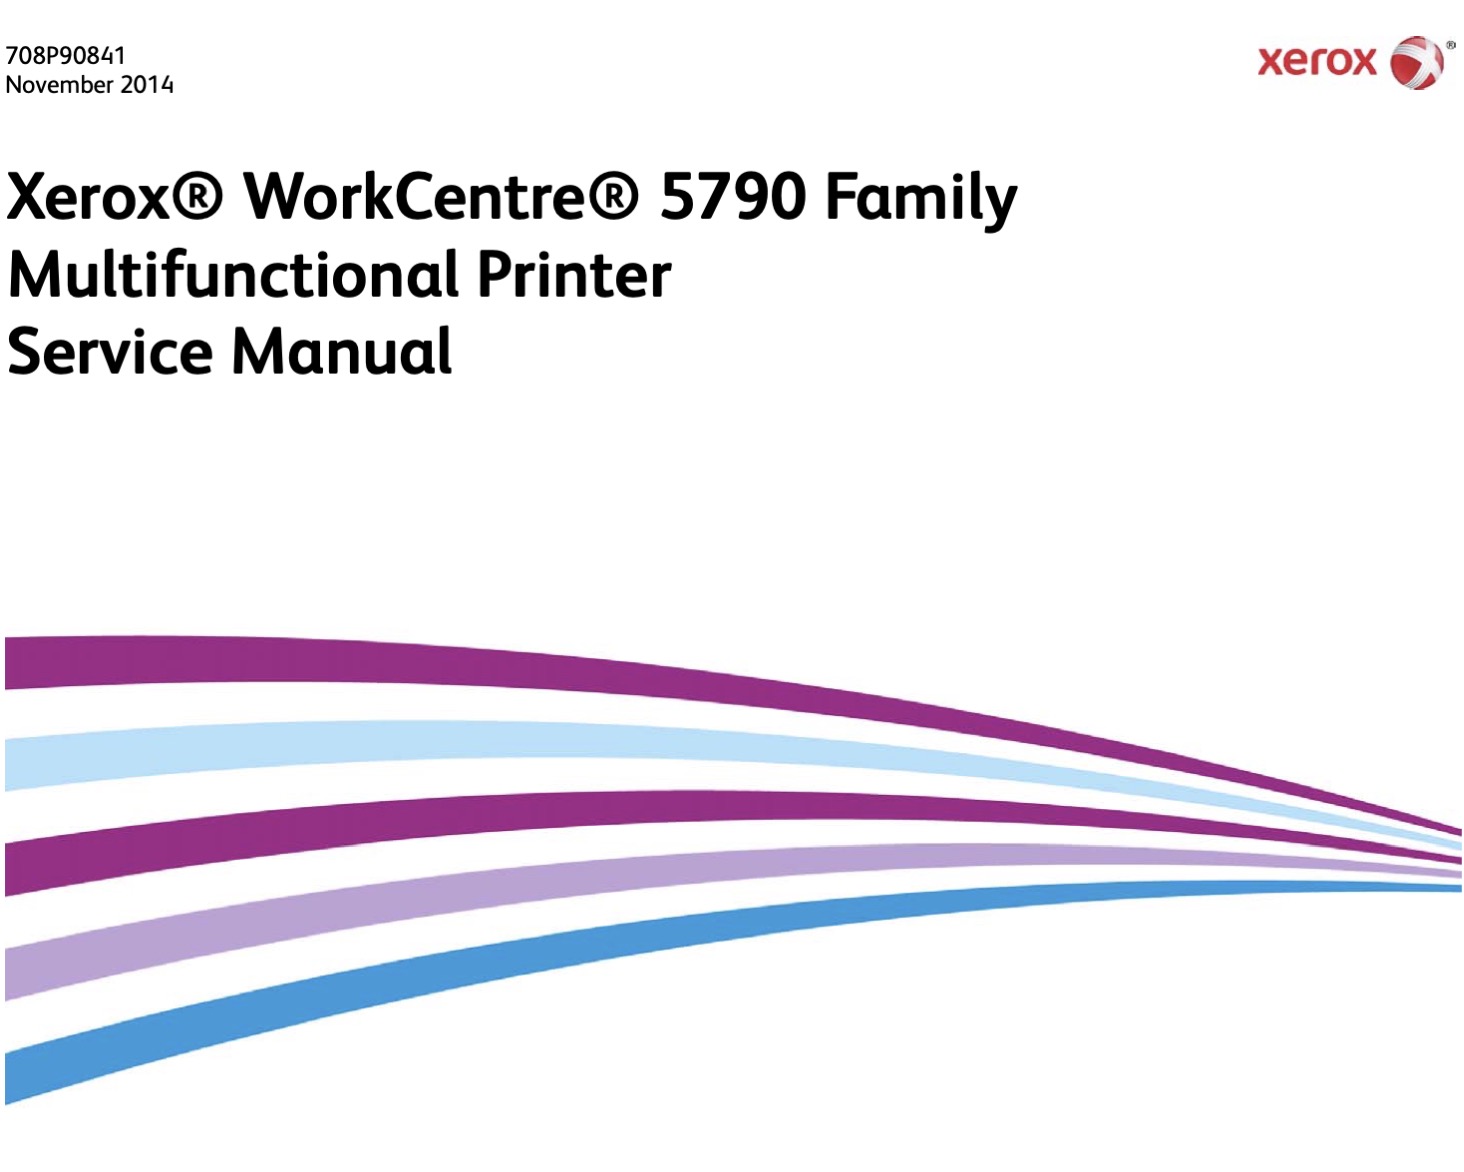 Xerox WorkCentre 5735, 5740, 5745, 5755, 5765, 5775, 5790 Family  Multifunctional Printer Service Manuals, Parts List, Wiring Diagram